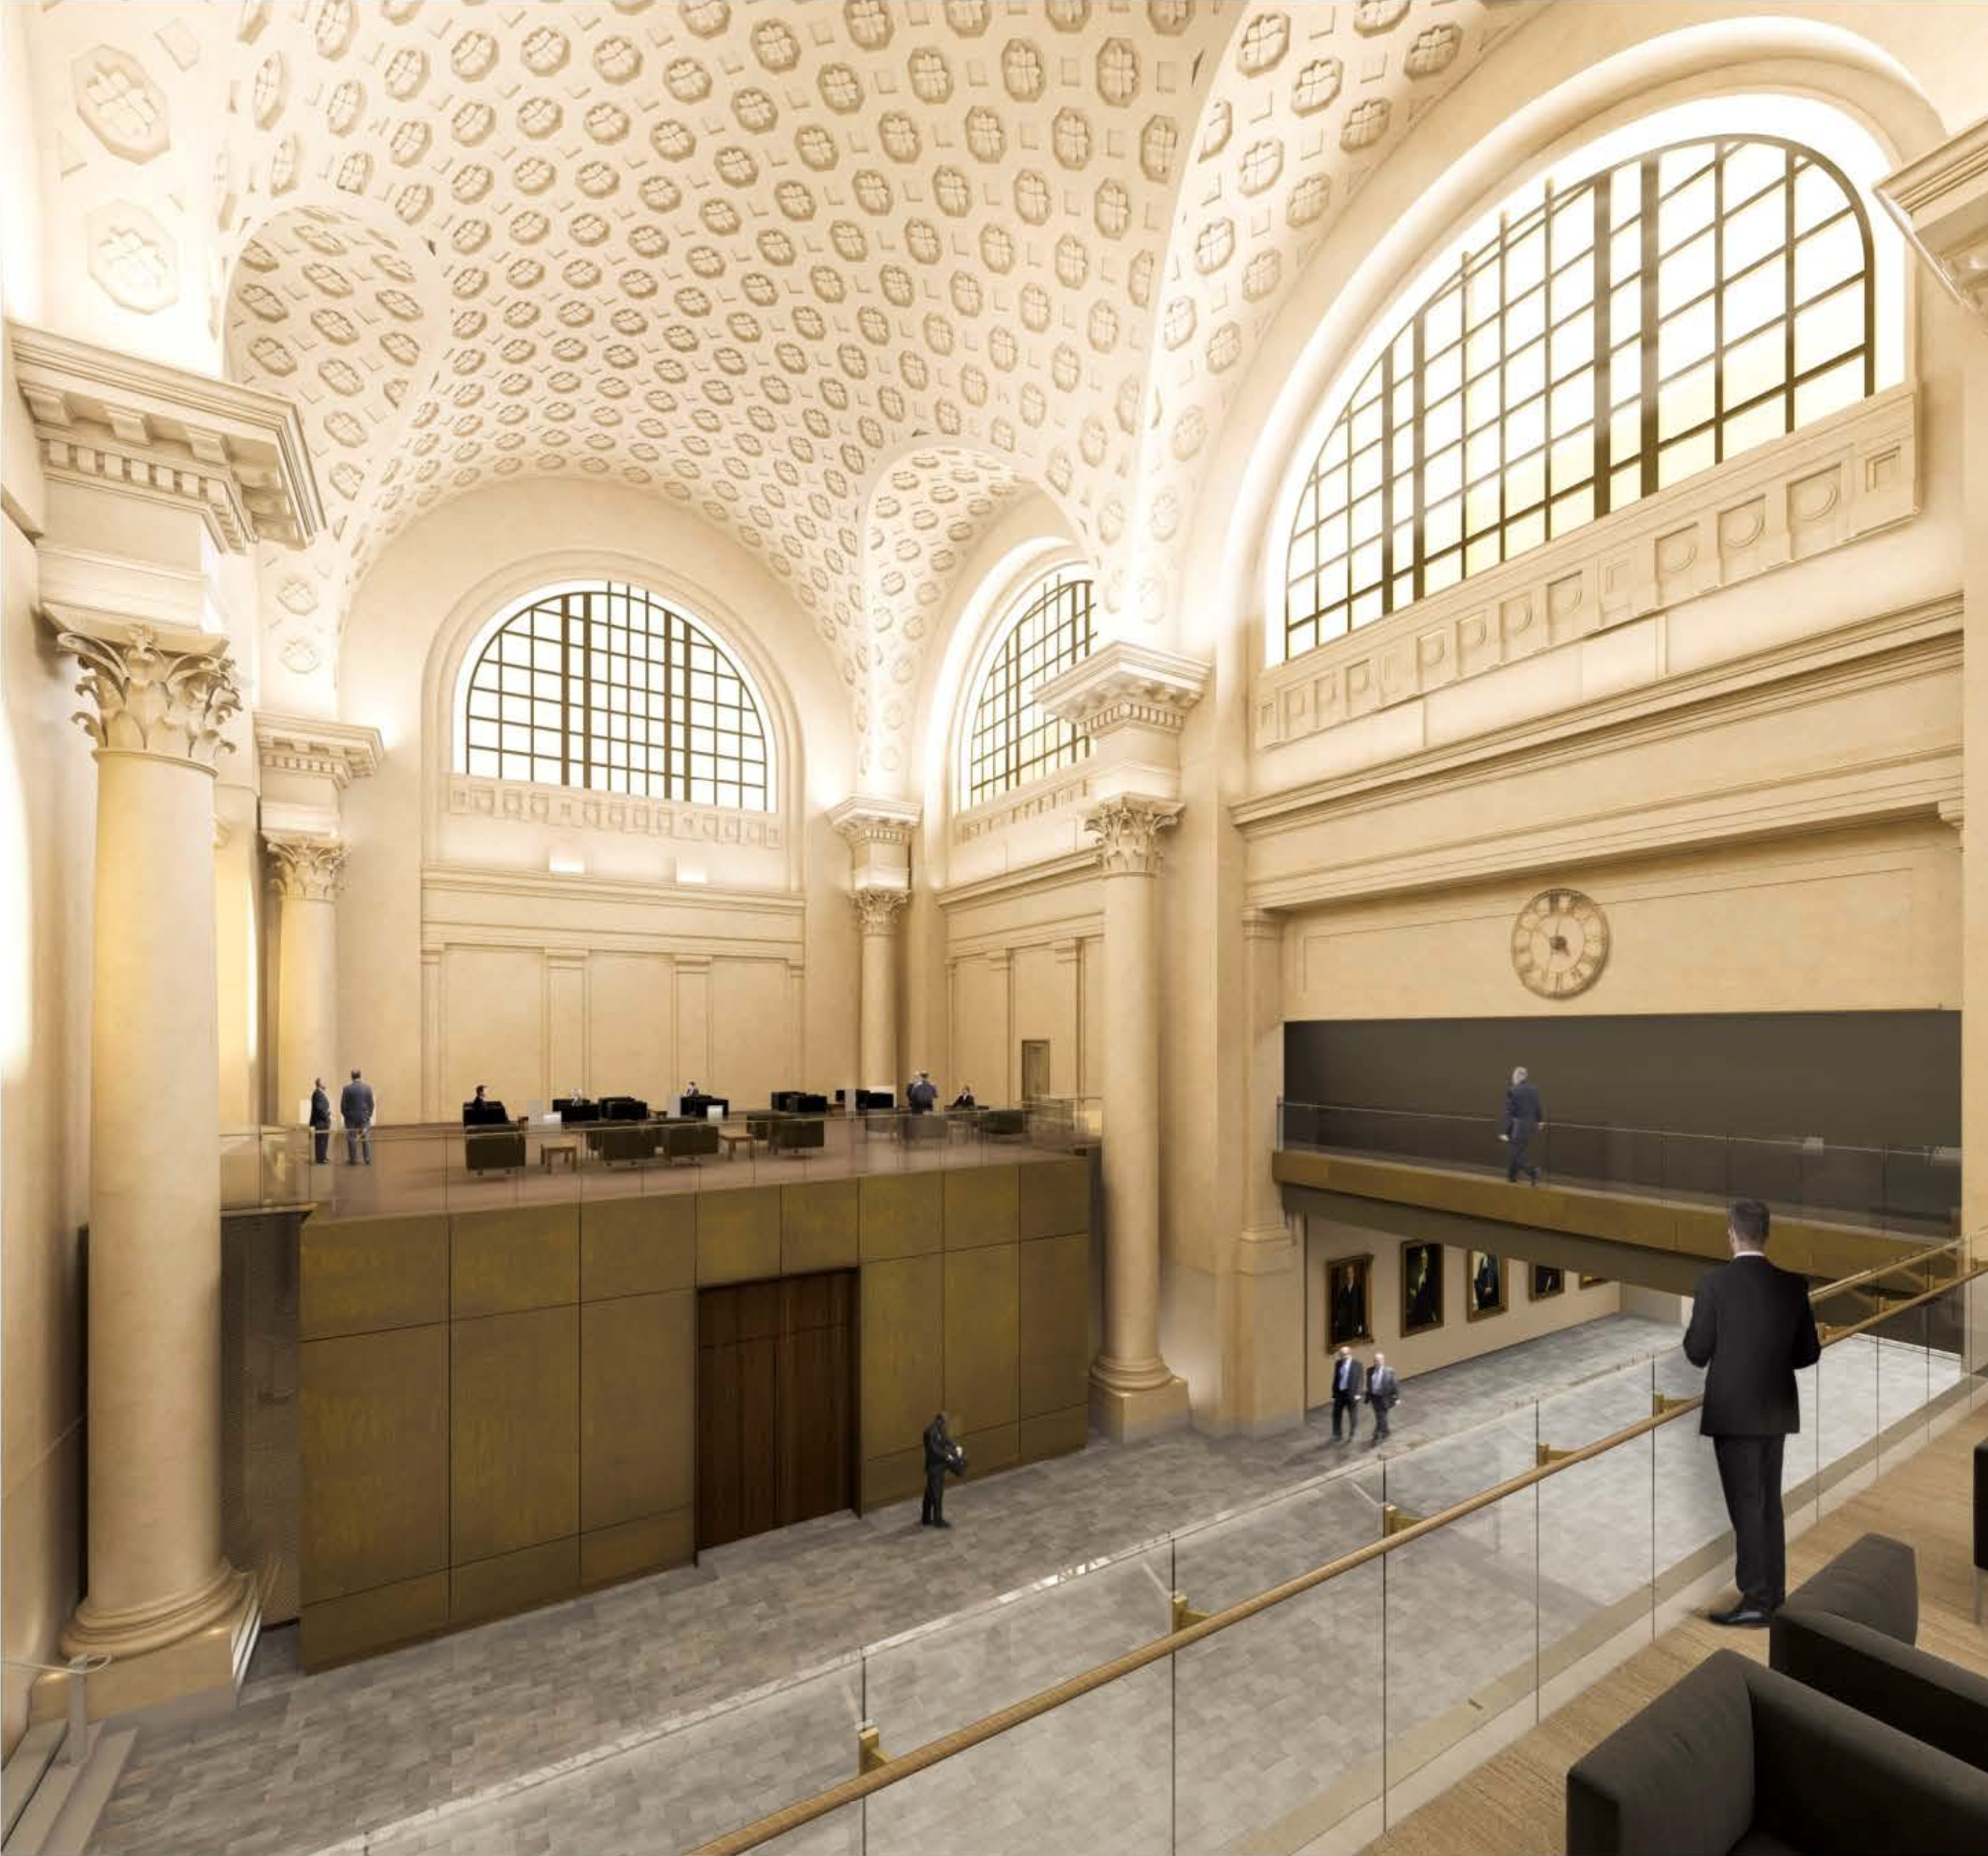 Architects have incorporated many of the architectural features that were typical of an early 1900s train station, such as vaulted ceilings, massive columns and large semicircular windows, into the design for the Senate’s temporary home.